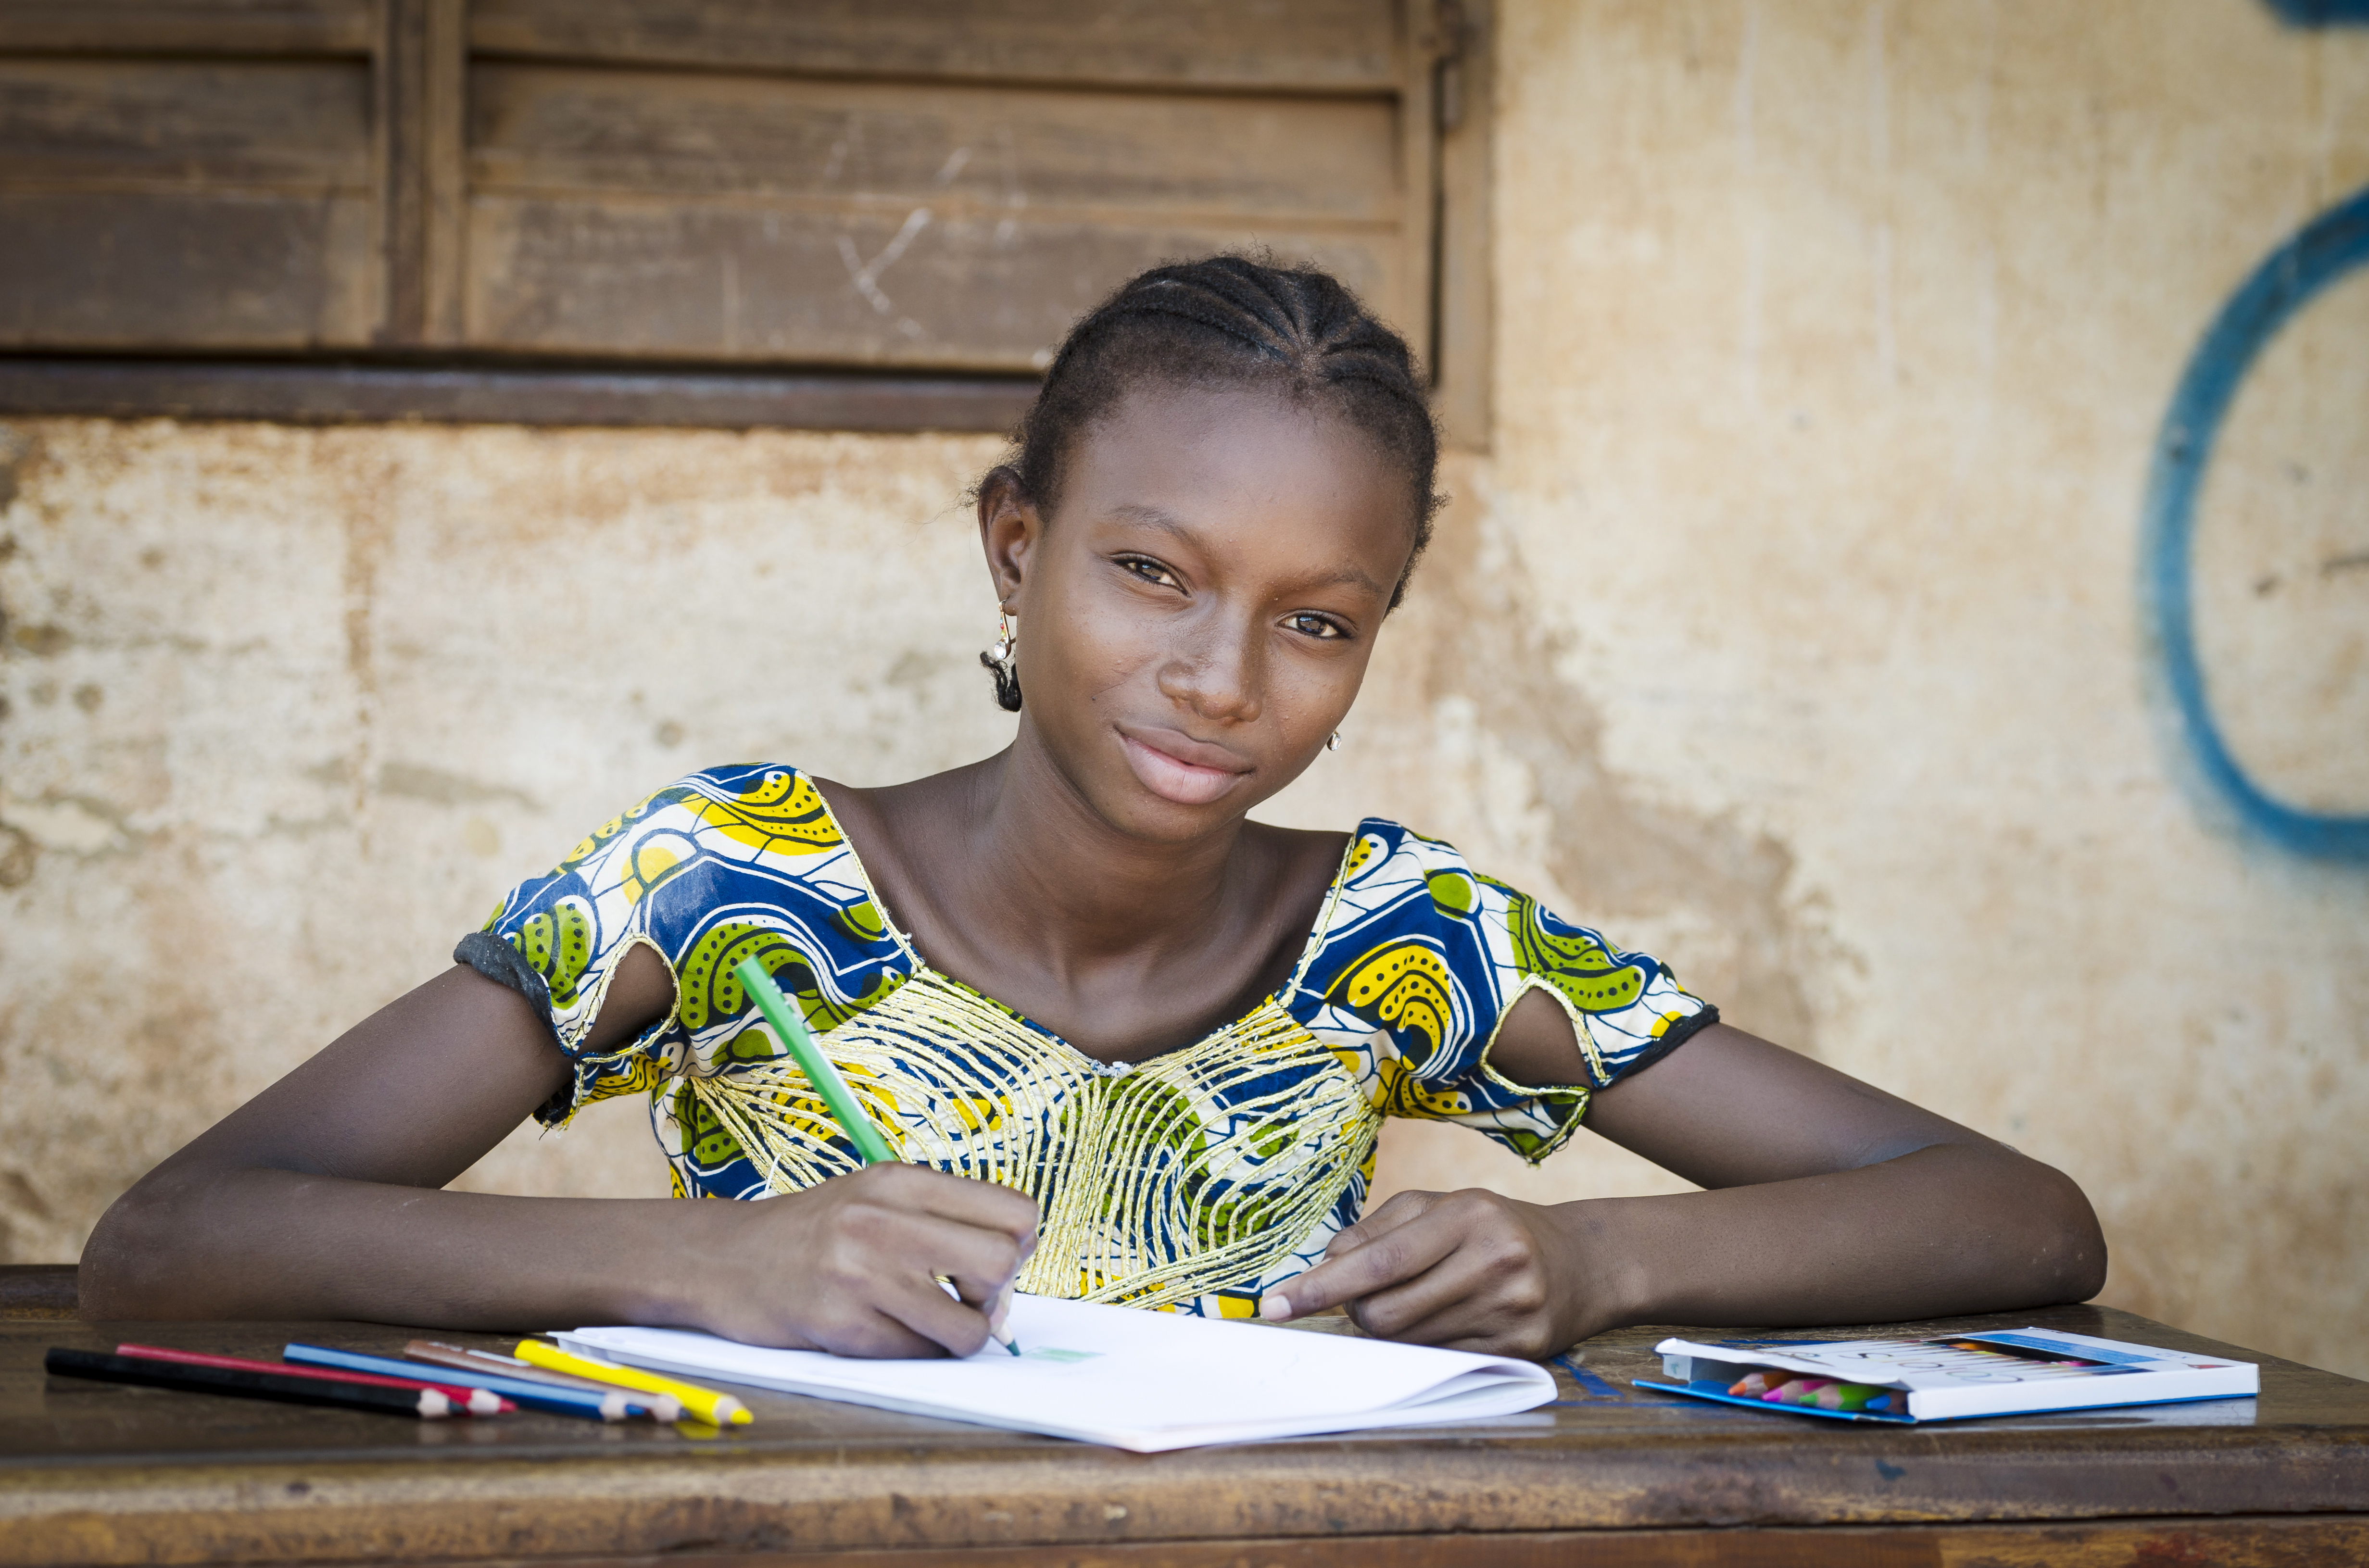 A schoolgirl poses for a photo in an educational setting. © 2023 Riccardo Mayer/Shutterstock.com